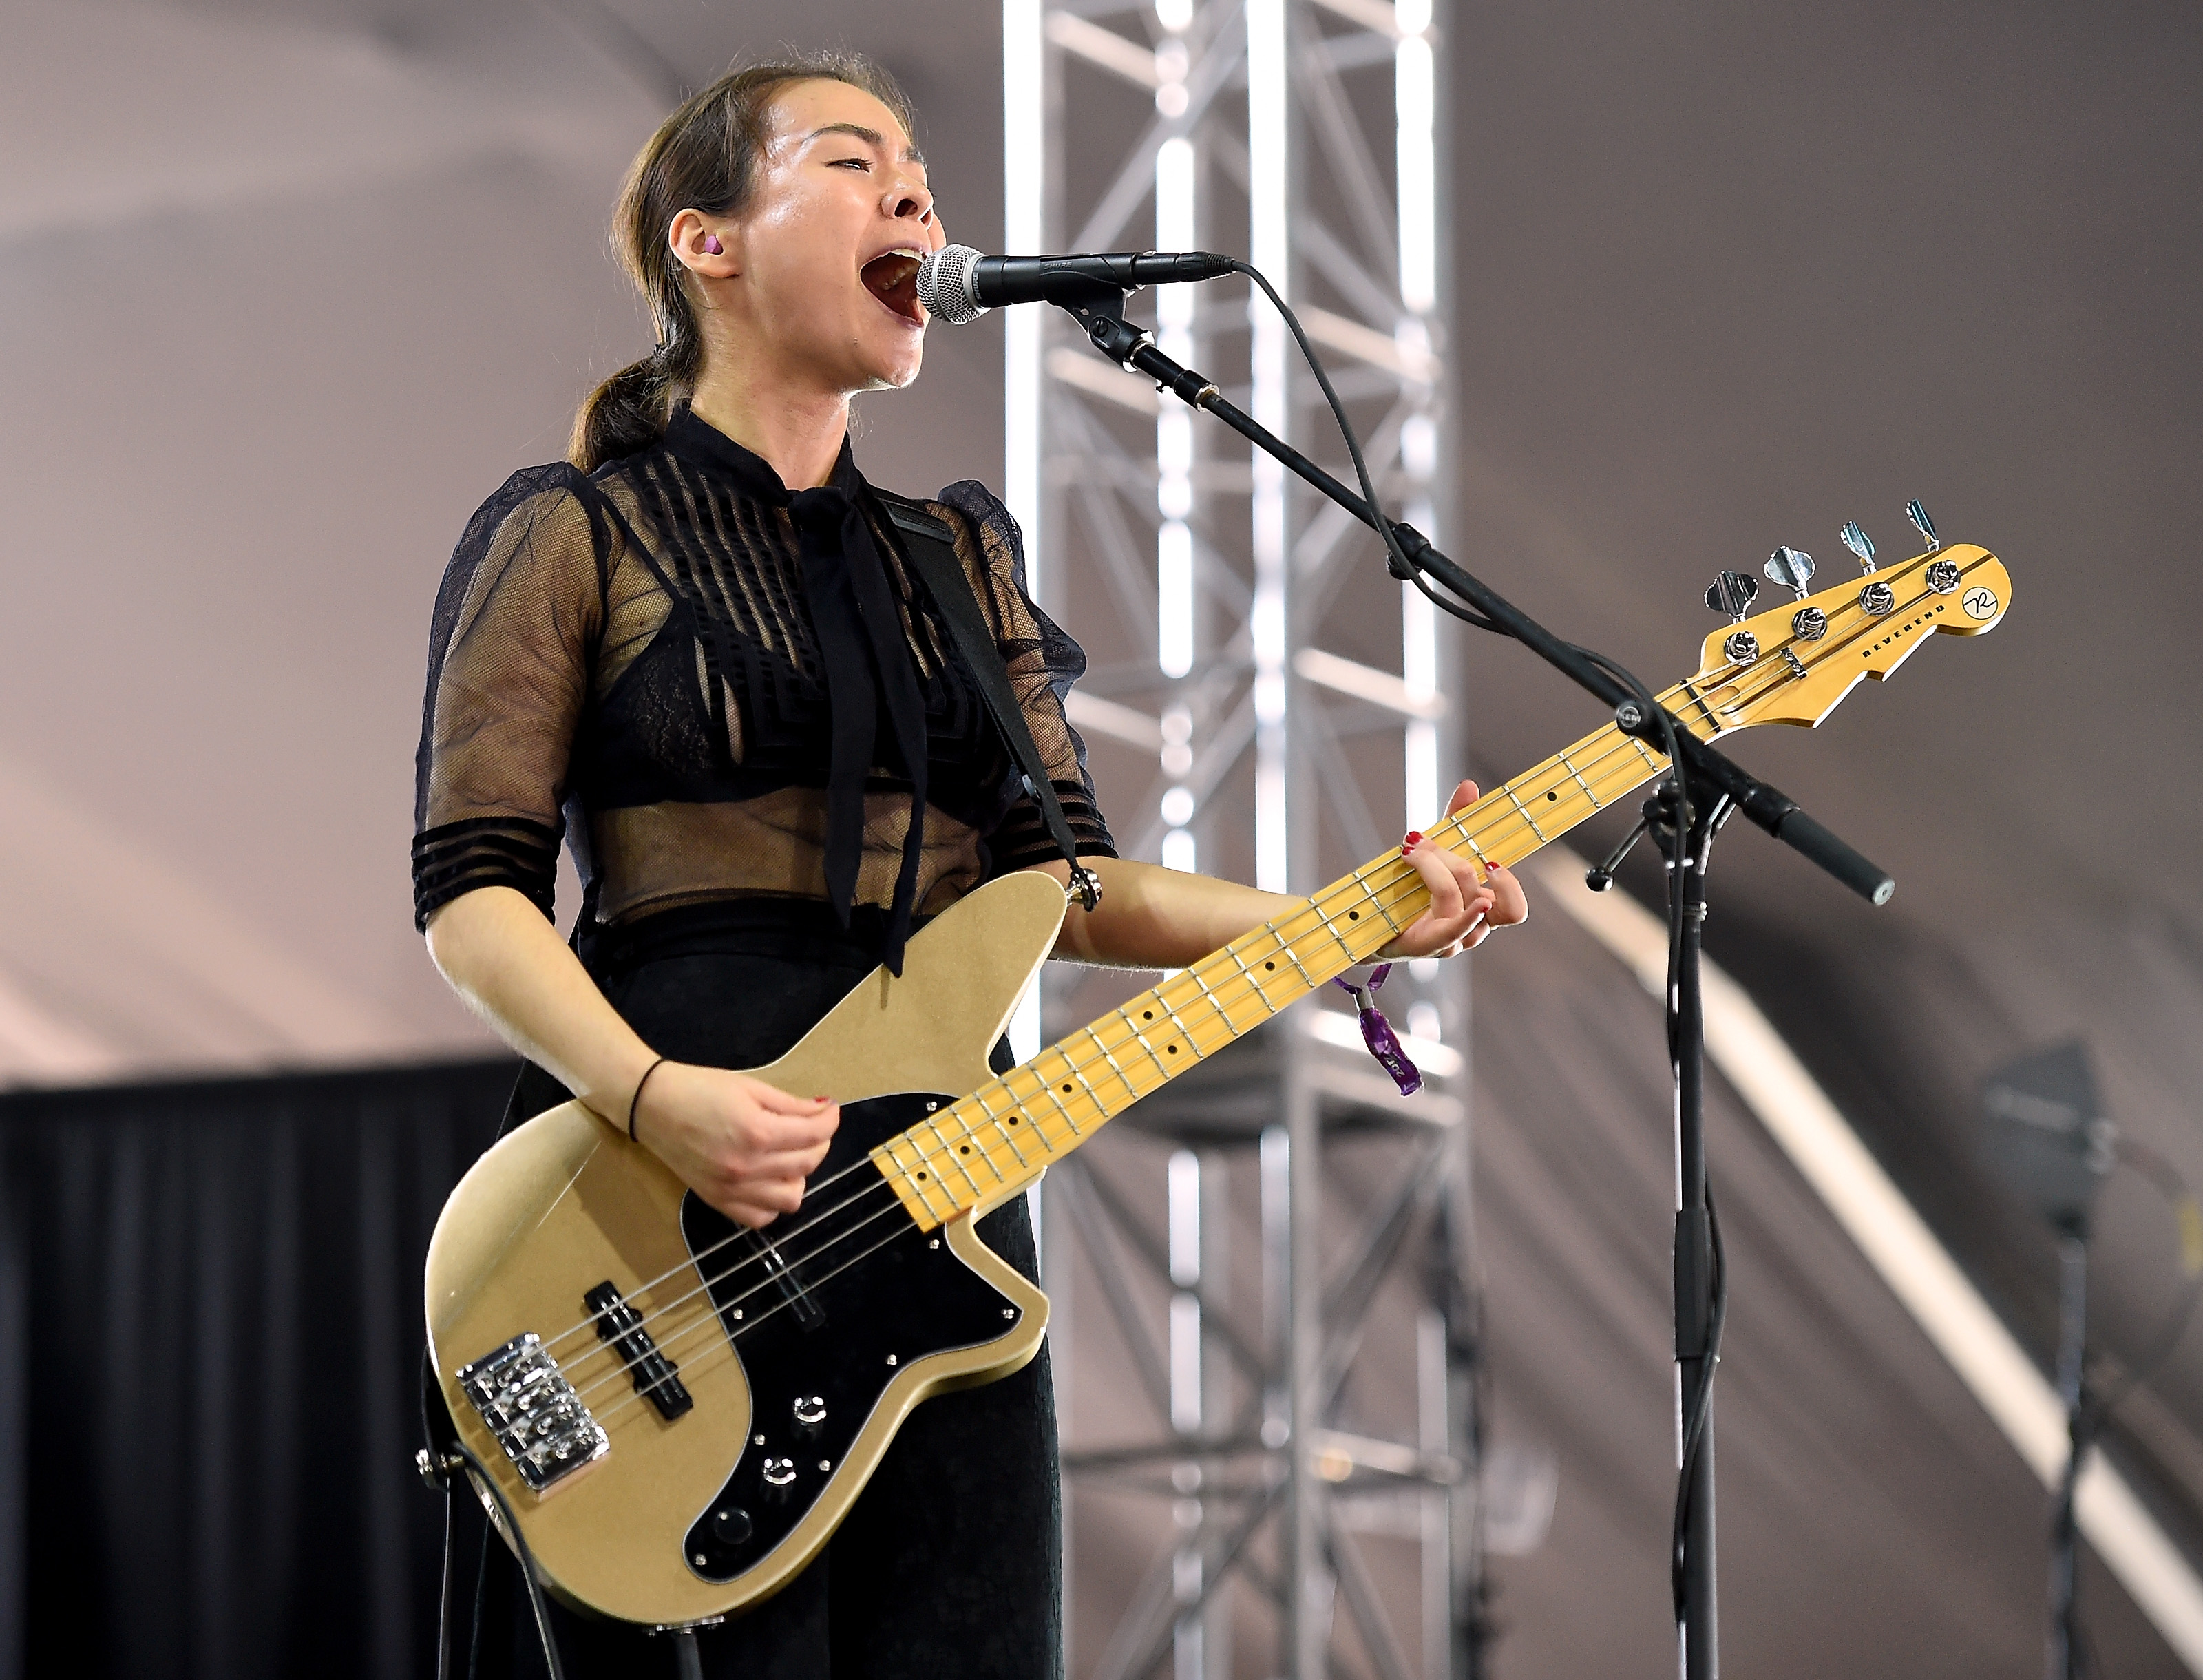 Mitski onstage at the 2017 Panorama Music Festival at Randall's Island in 2017, in New York City. | Source: Getty Images